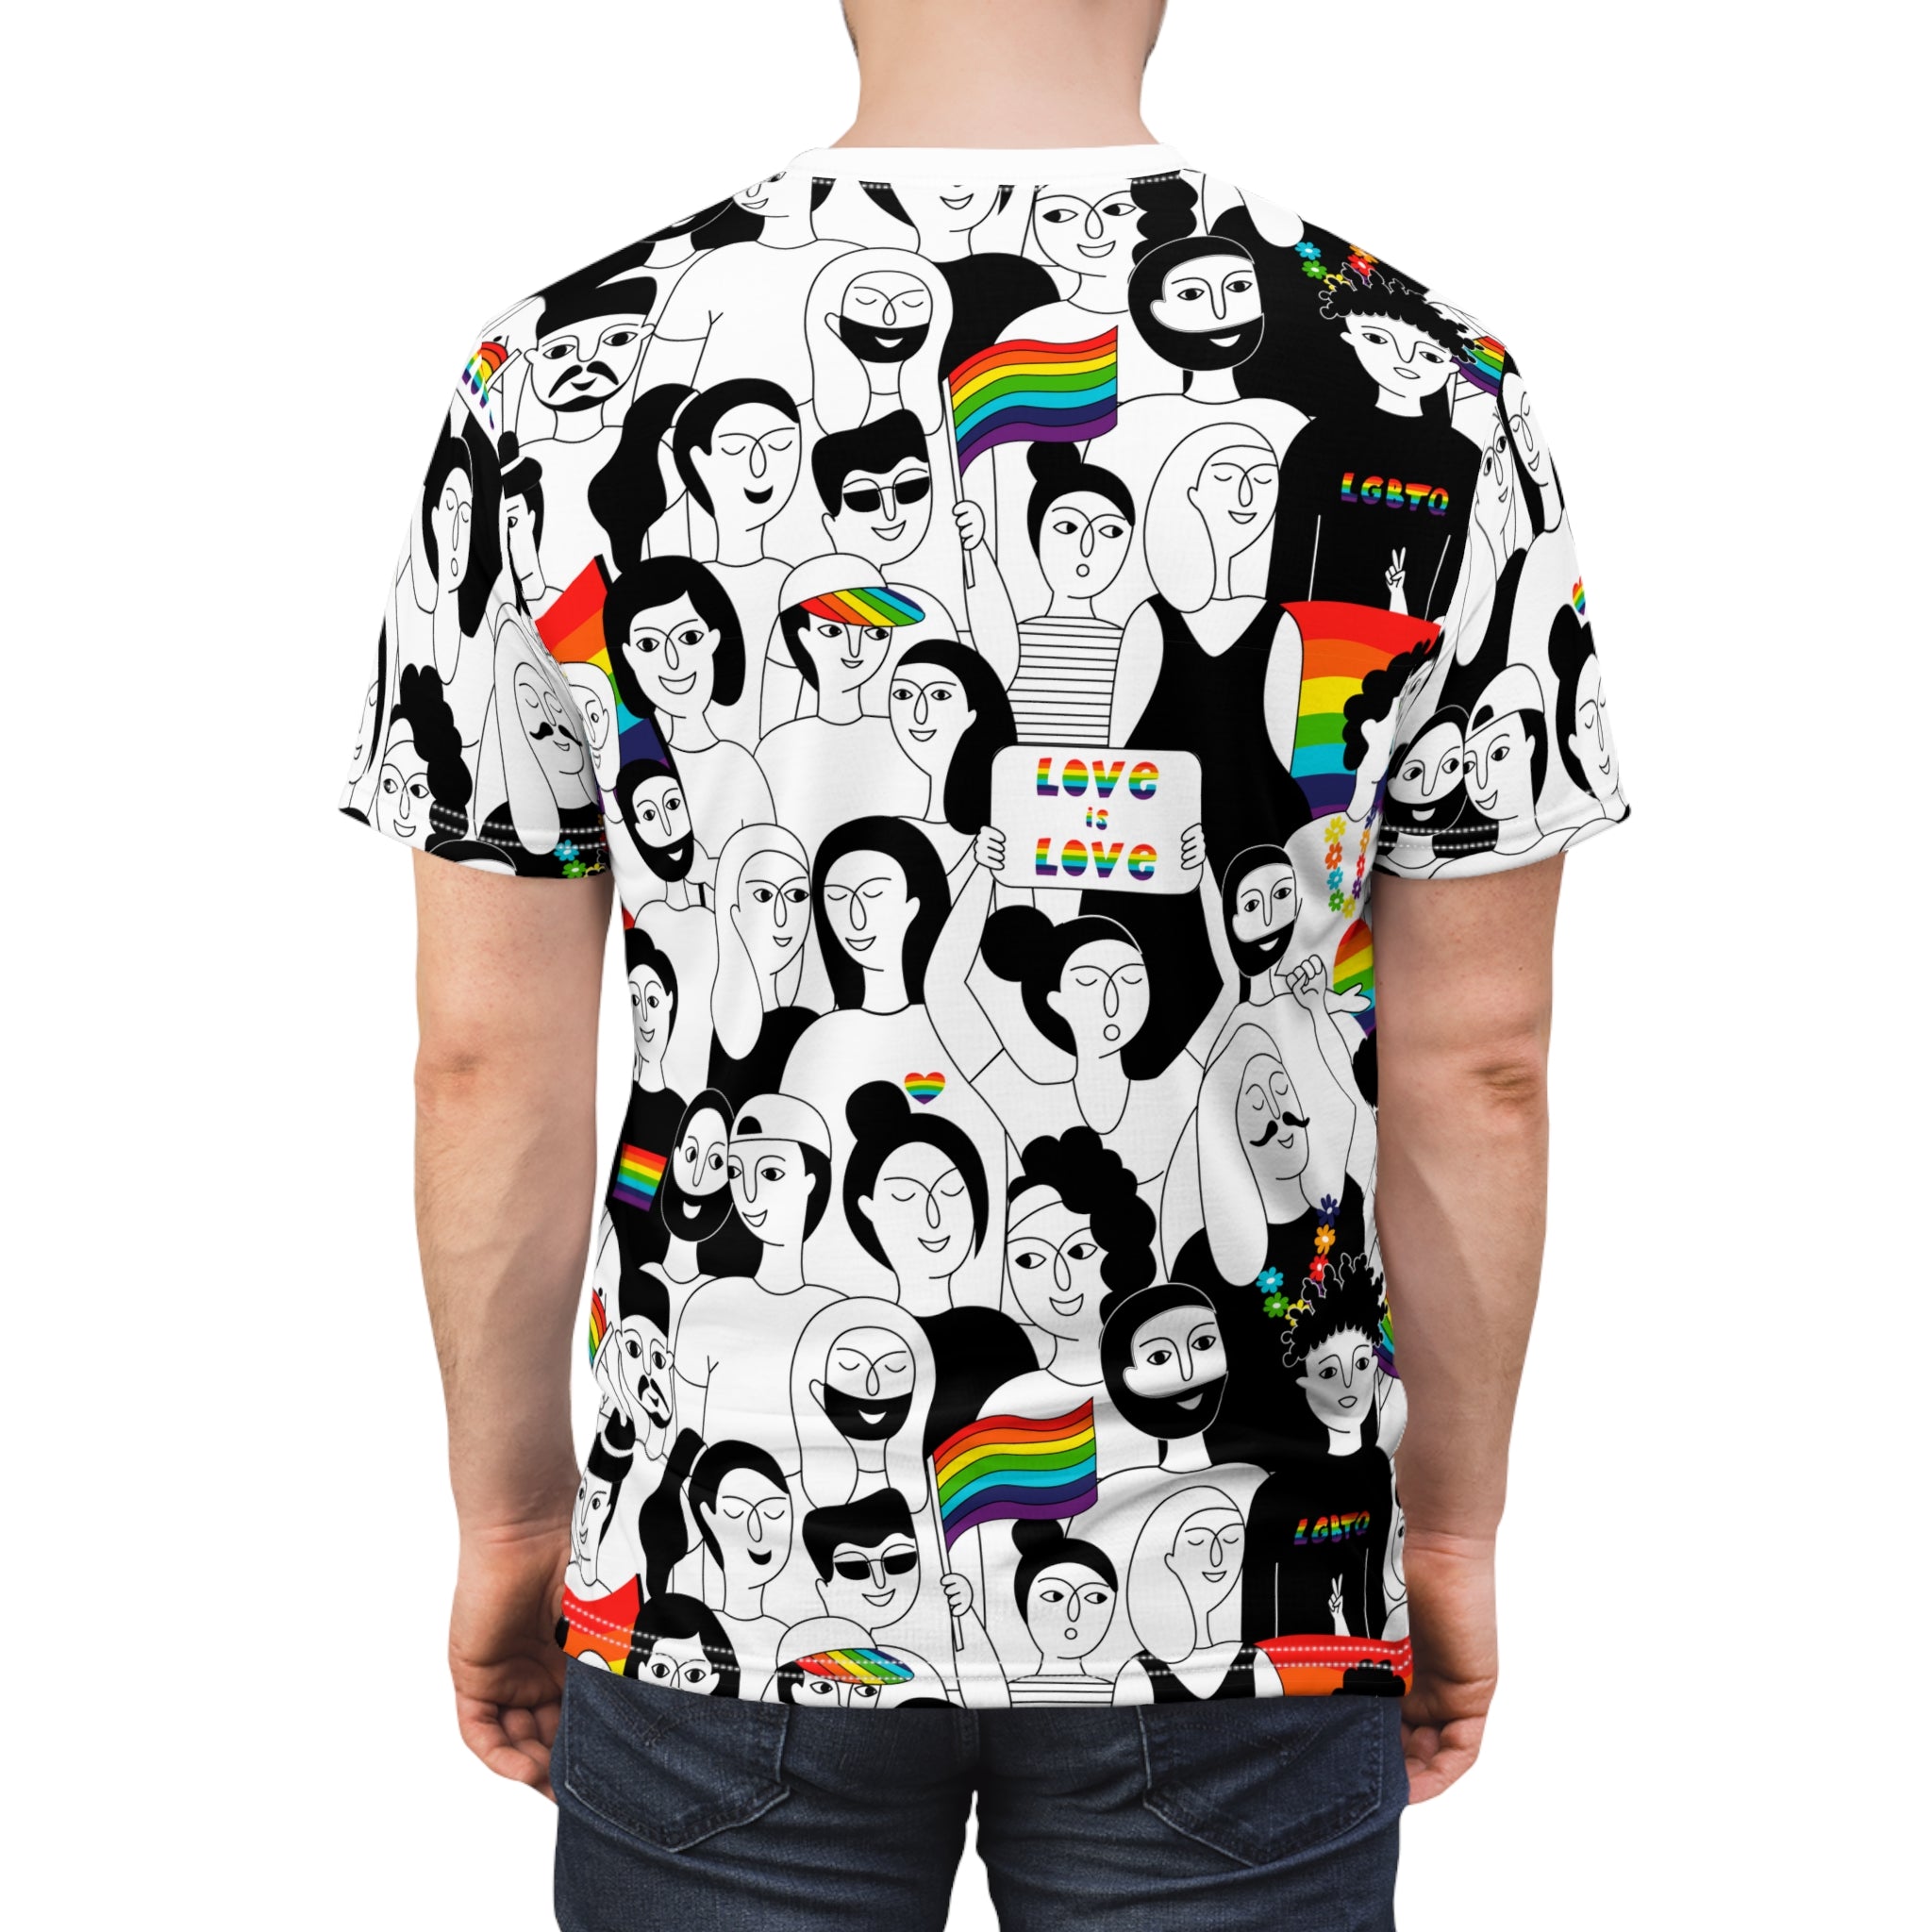 Love is Love Gay Pride Rainbow Flag All Over Print Unisex Graphic Tshirt